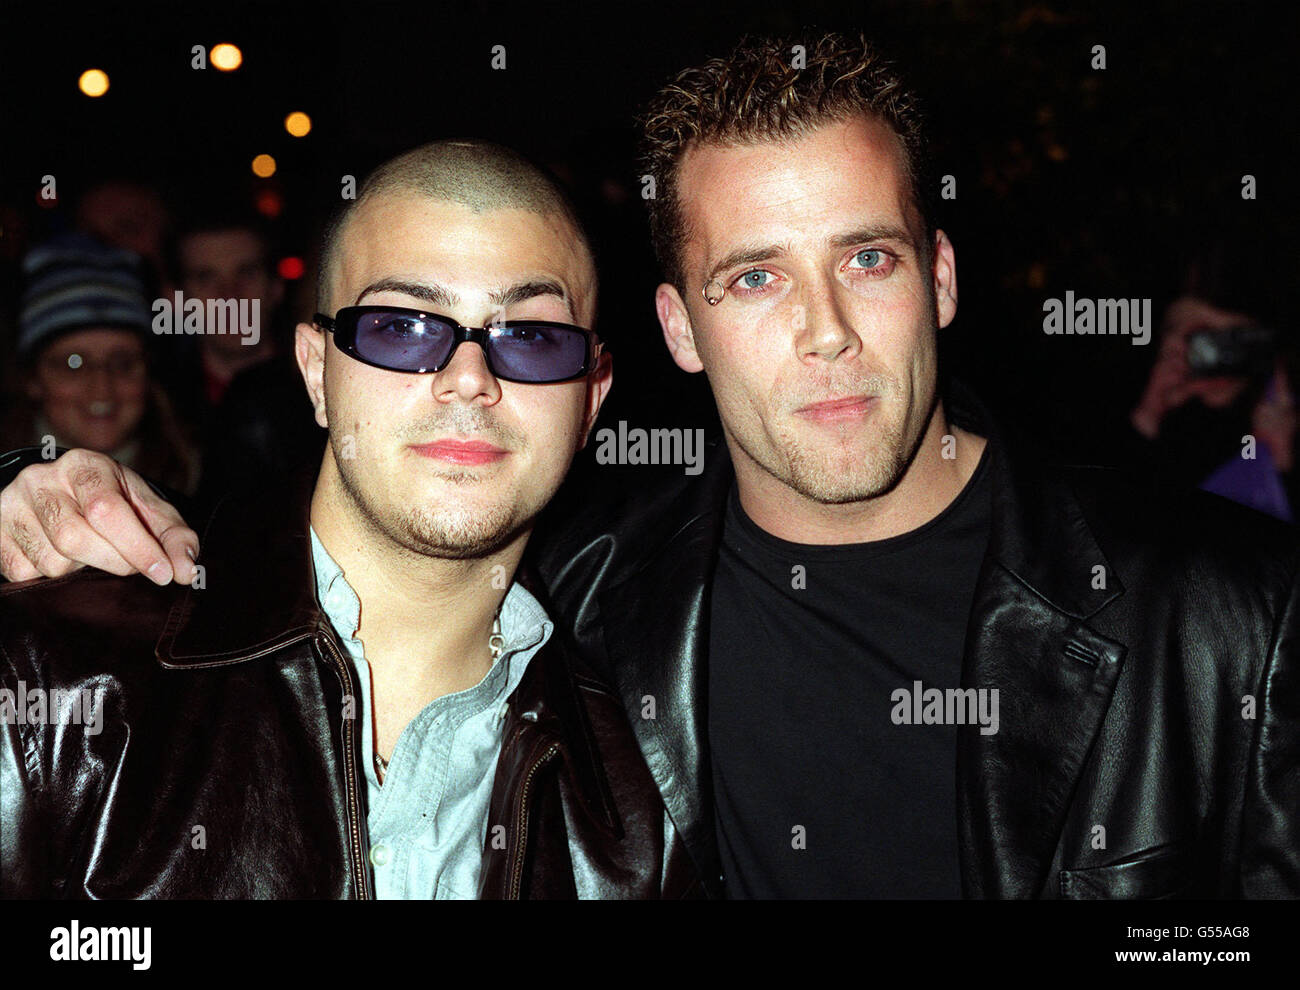 Abs Breen (Richard Breen) and J Brown (Jason Brown), (right) from the boy band Five arriving at the launch party for Irish boy band Westlife's new album, 'Coast to Coast' at St Martin's Hotel in London. Stock Photo